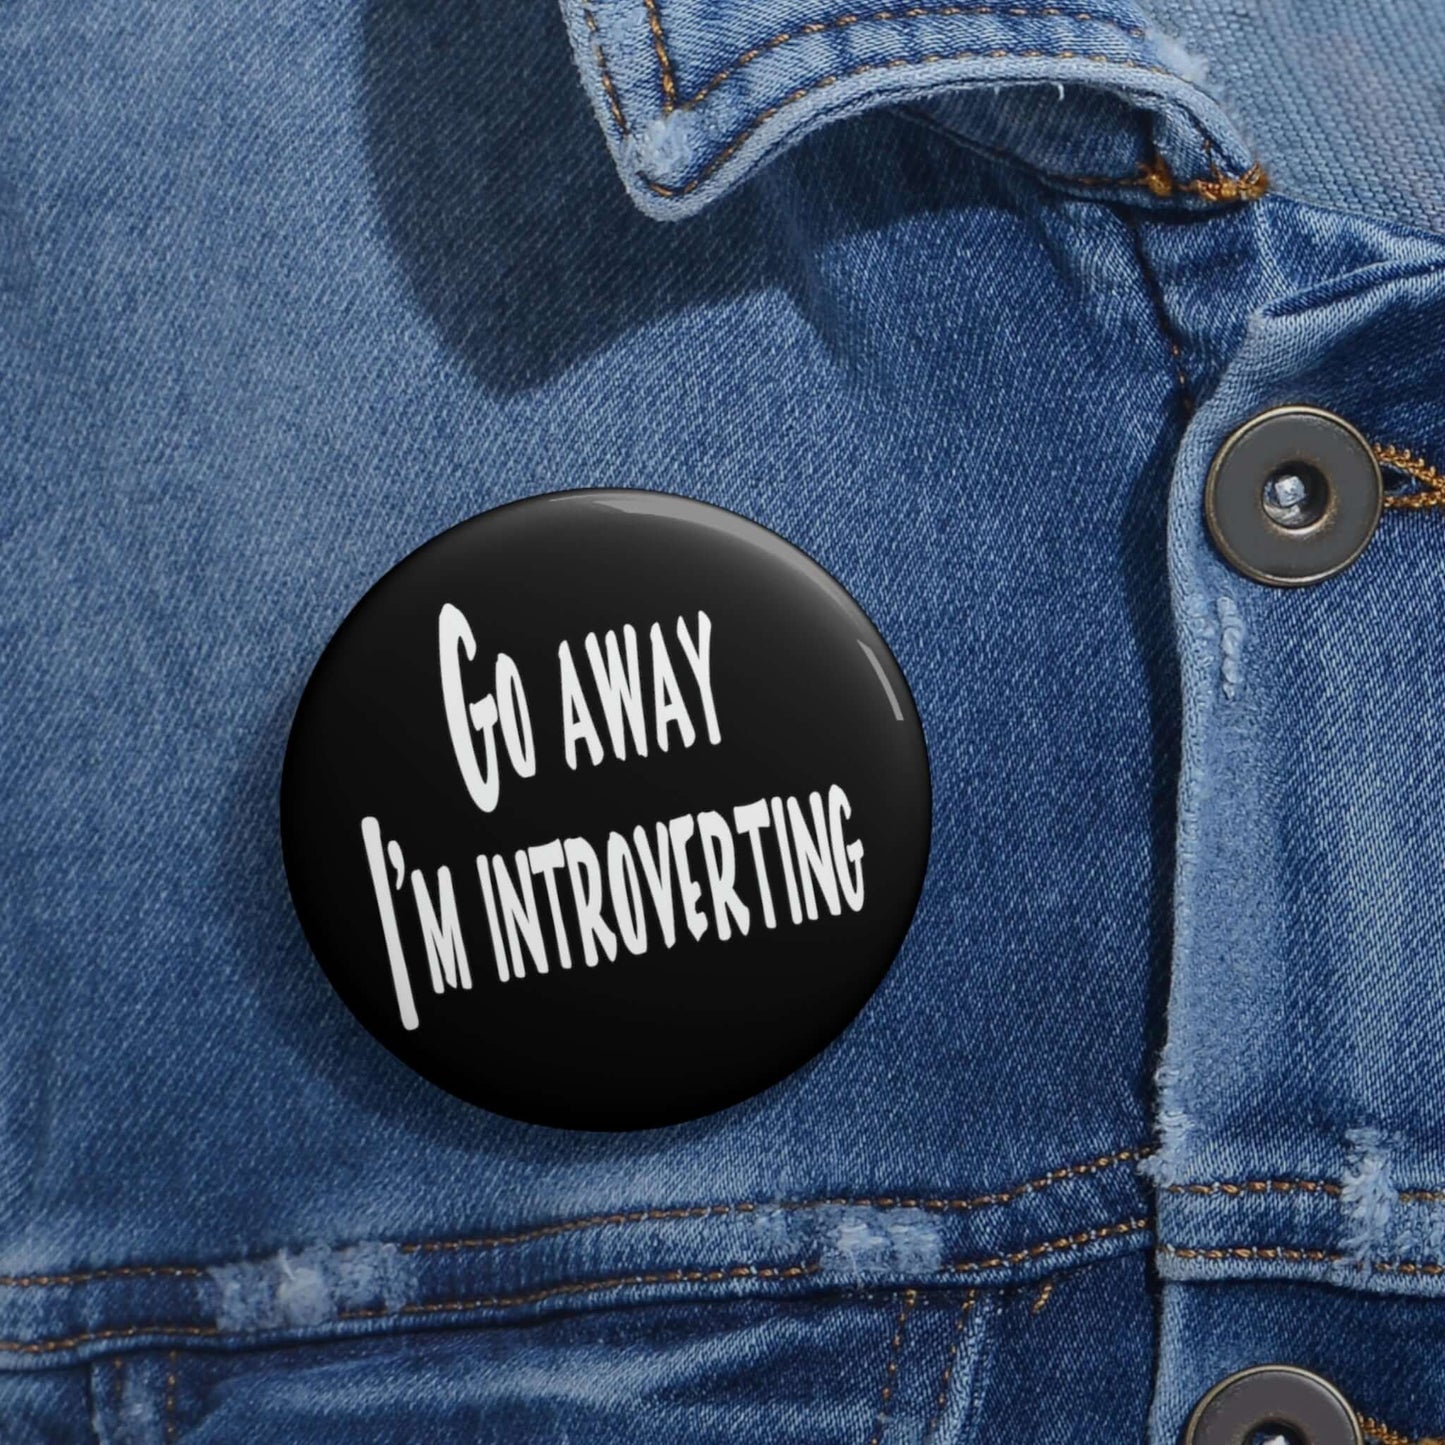 I'm introverting  pinback button